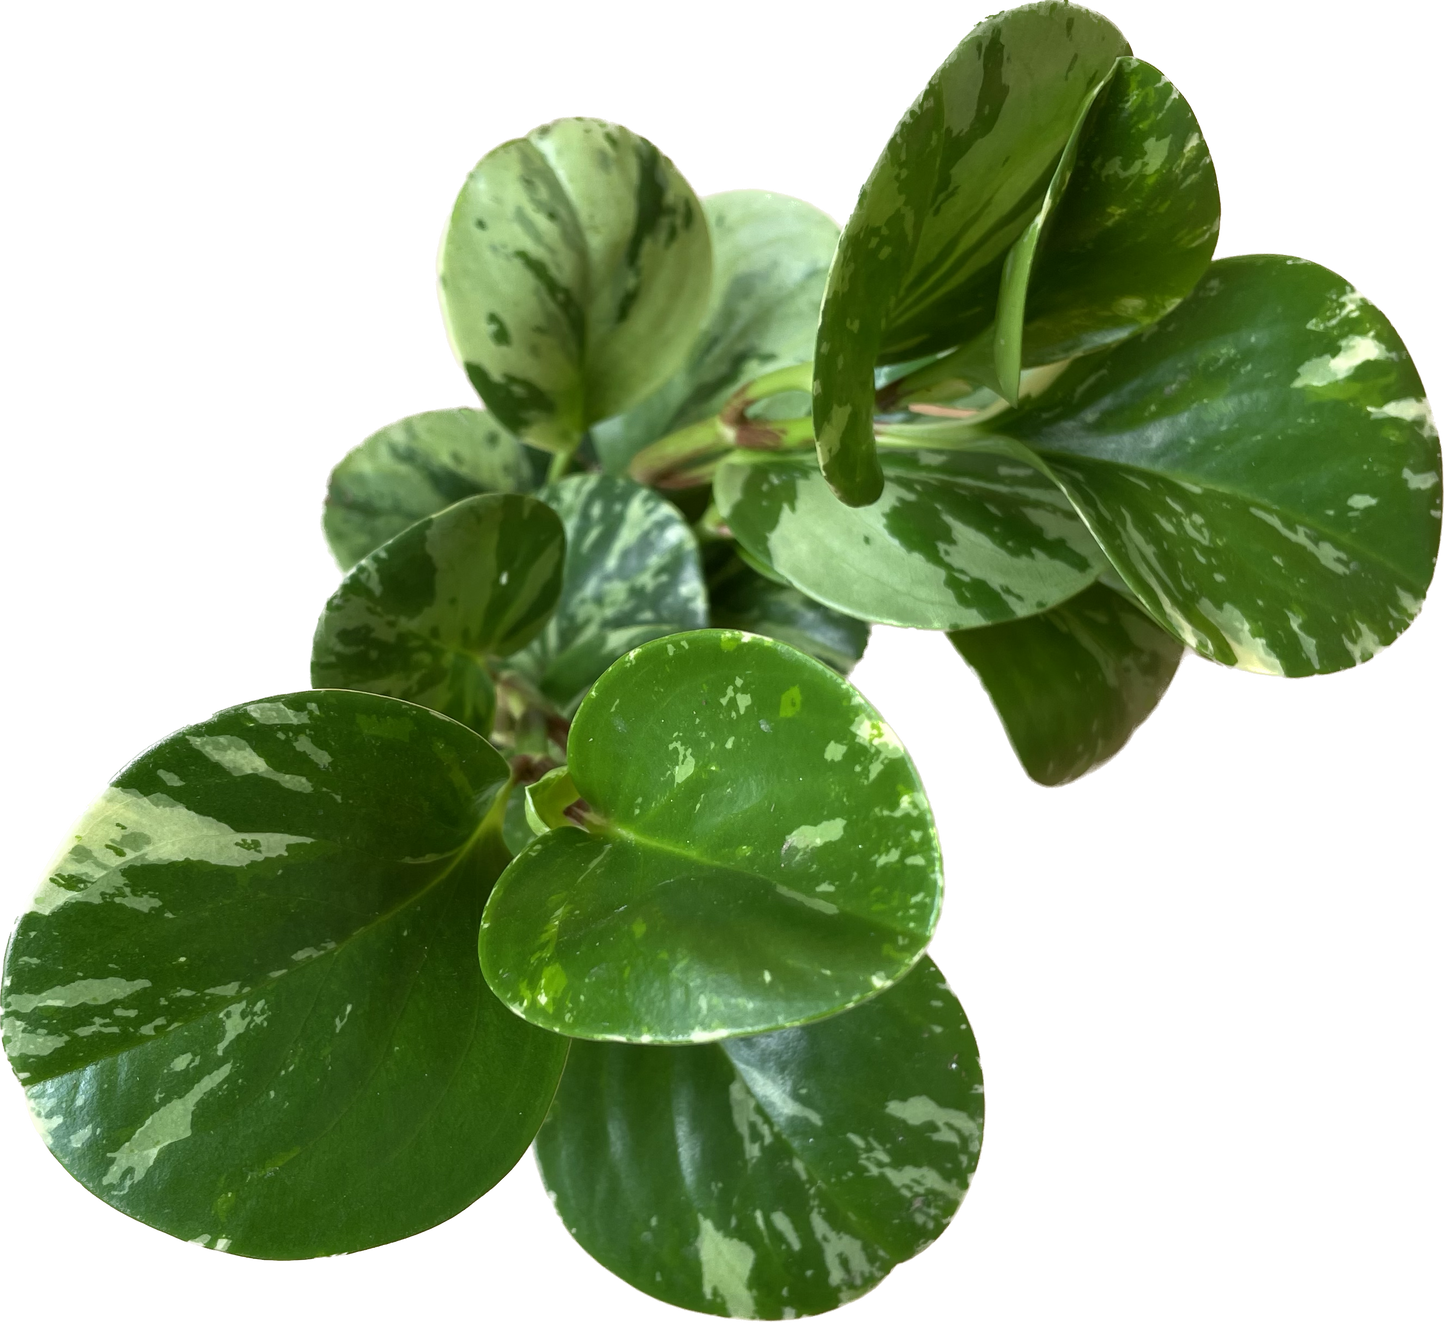 Live Rubber Plant - Peperomia Obtusifolia Variegated - Peperomia 'Marble' Available in 3", 4", and 6" Pots - CA Seller - Ideal Gift for Office, Garden and Home - Peperomia Live Plant